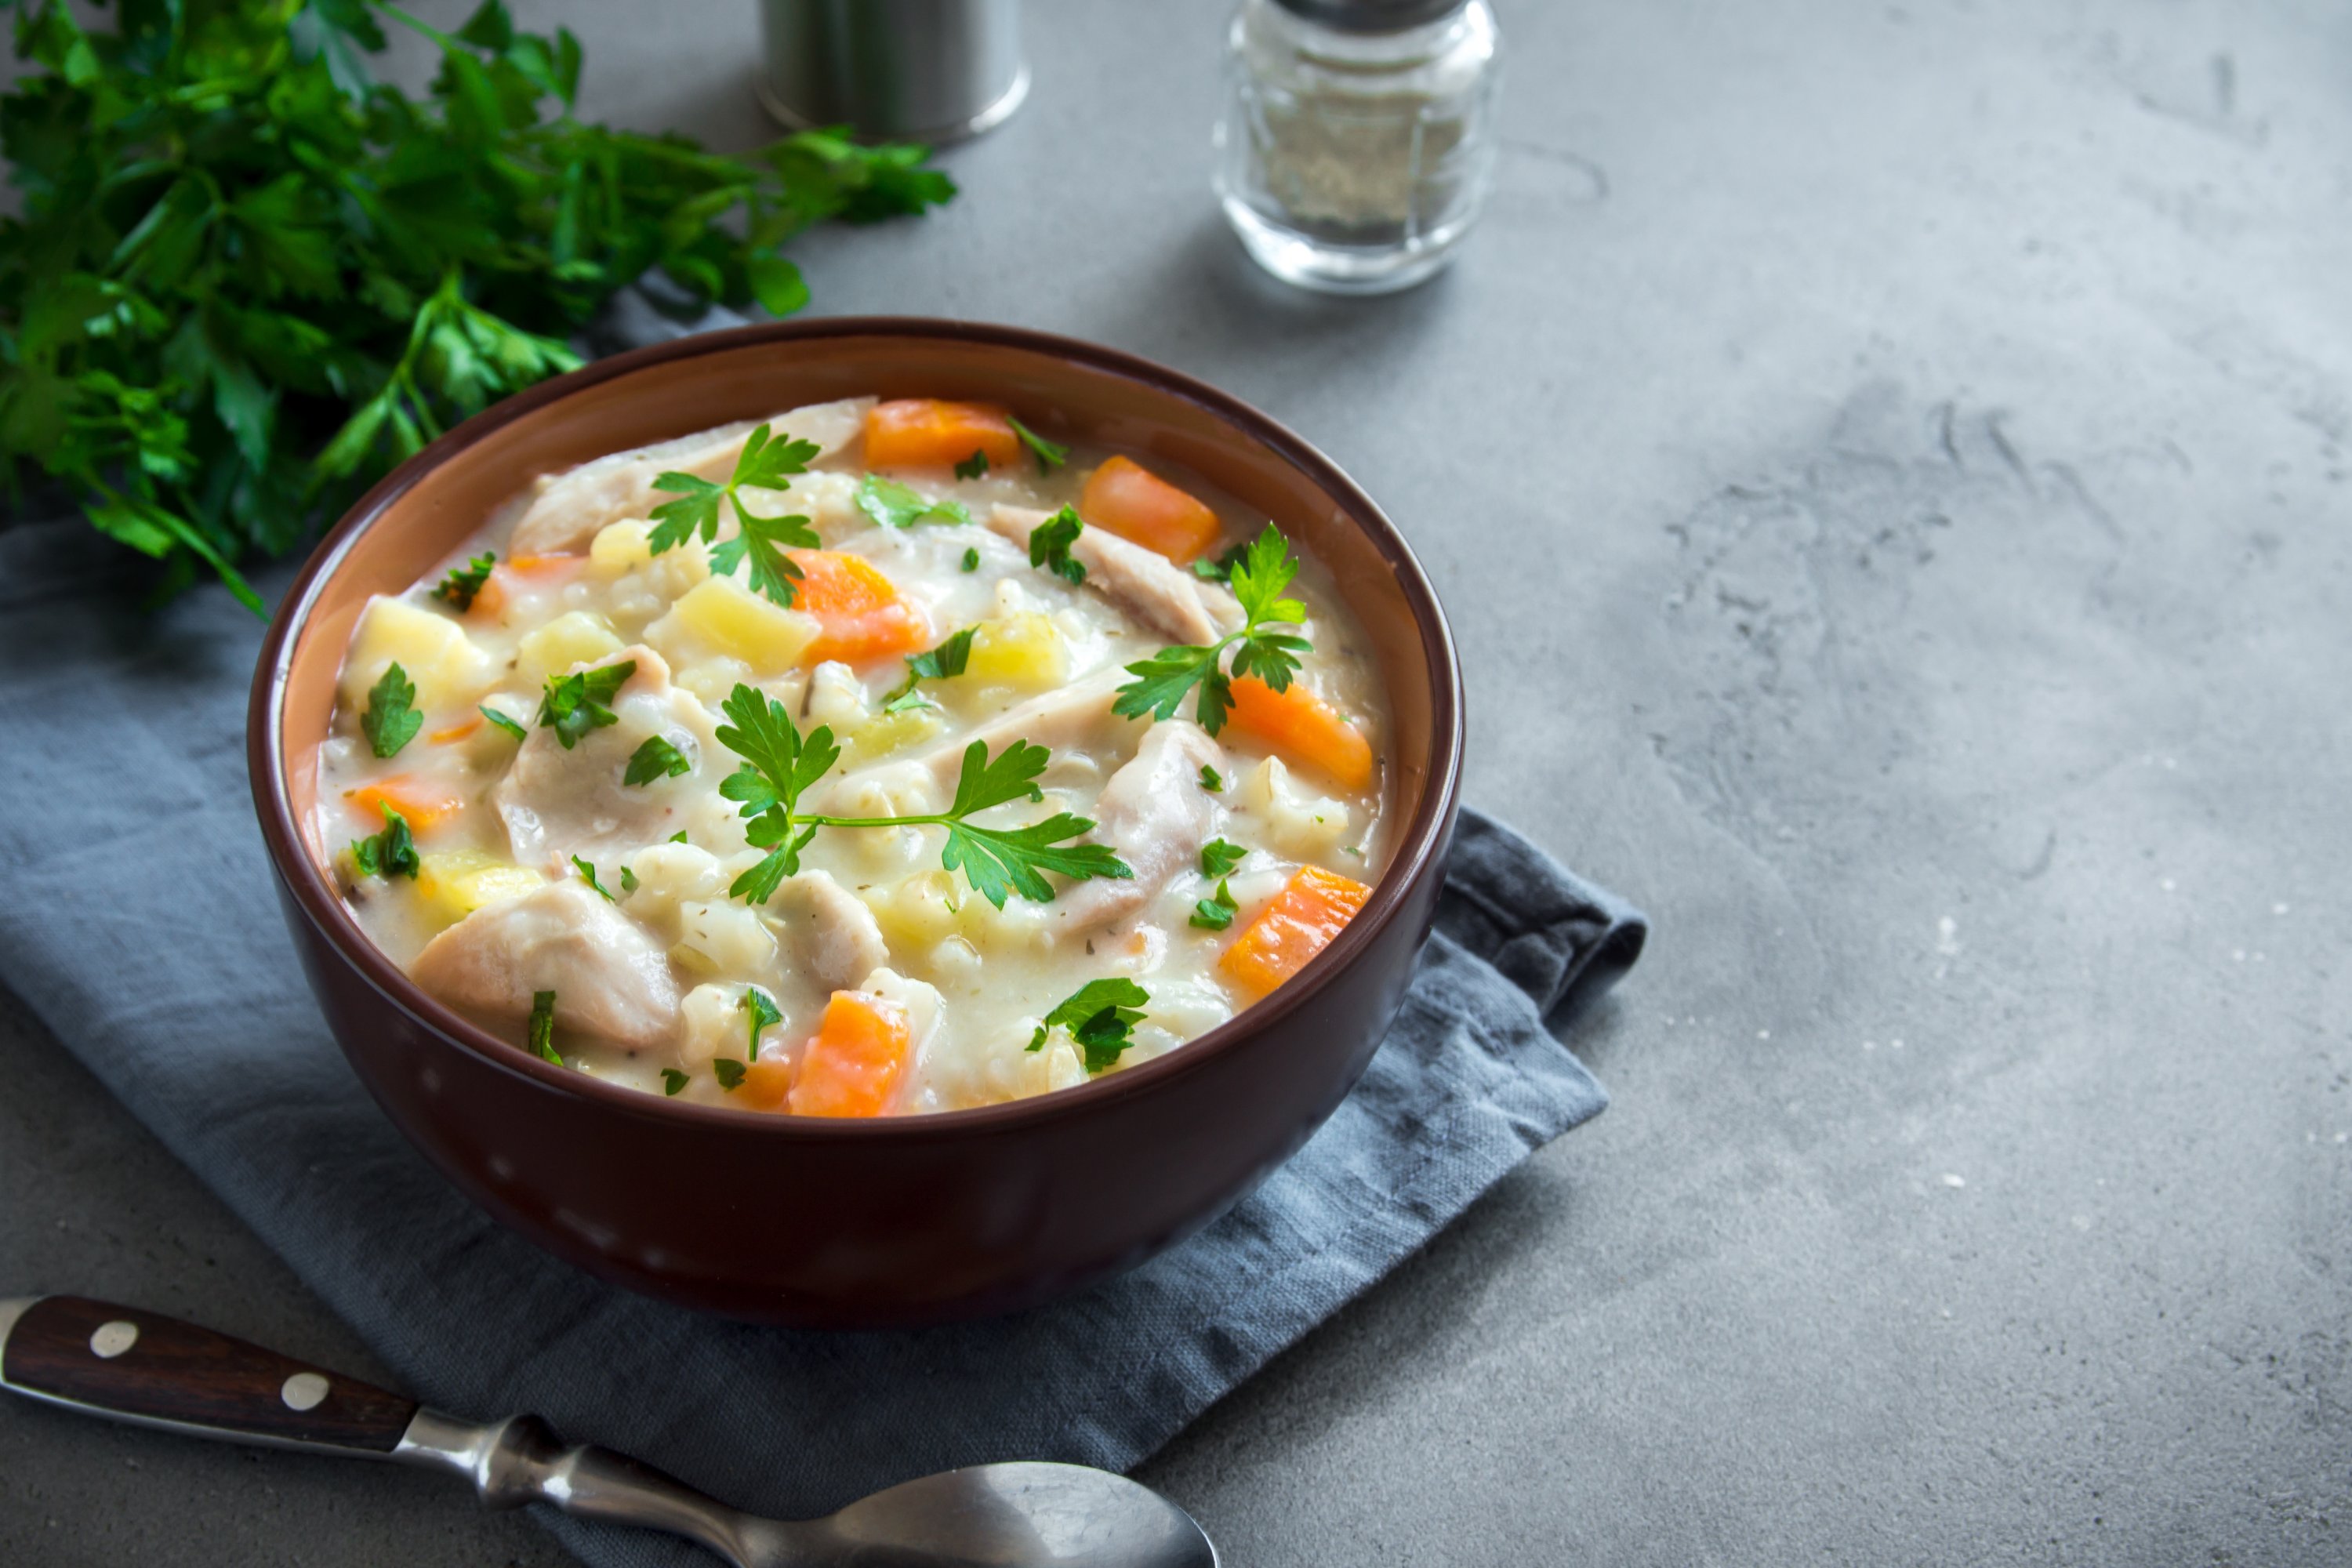 A winter soup made from chicken broth and vegetables will help strengthen the immune system. (Shutterstock Photo)